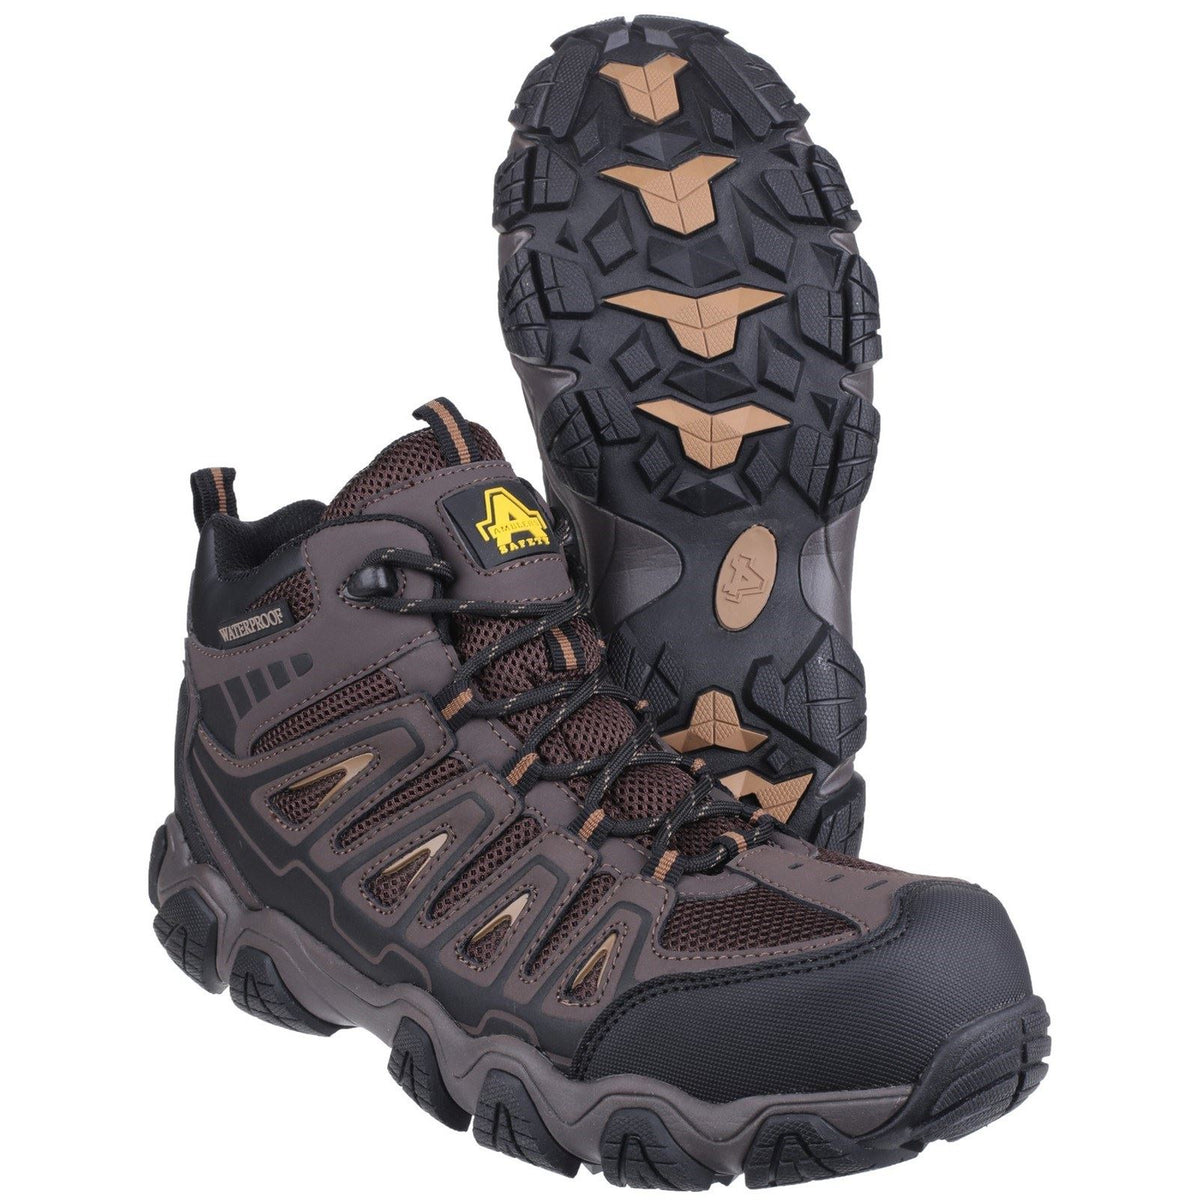 Amblers Safety AS801 Waterproof Non-Metal Safety Hiker Boots